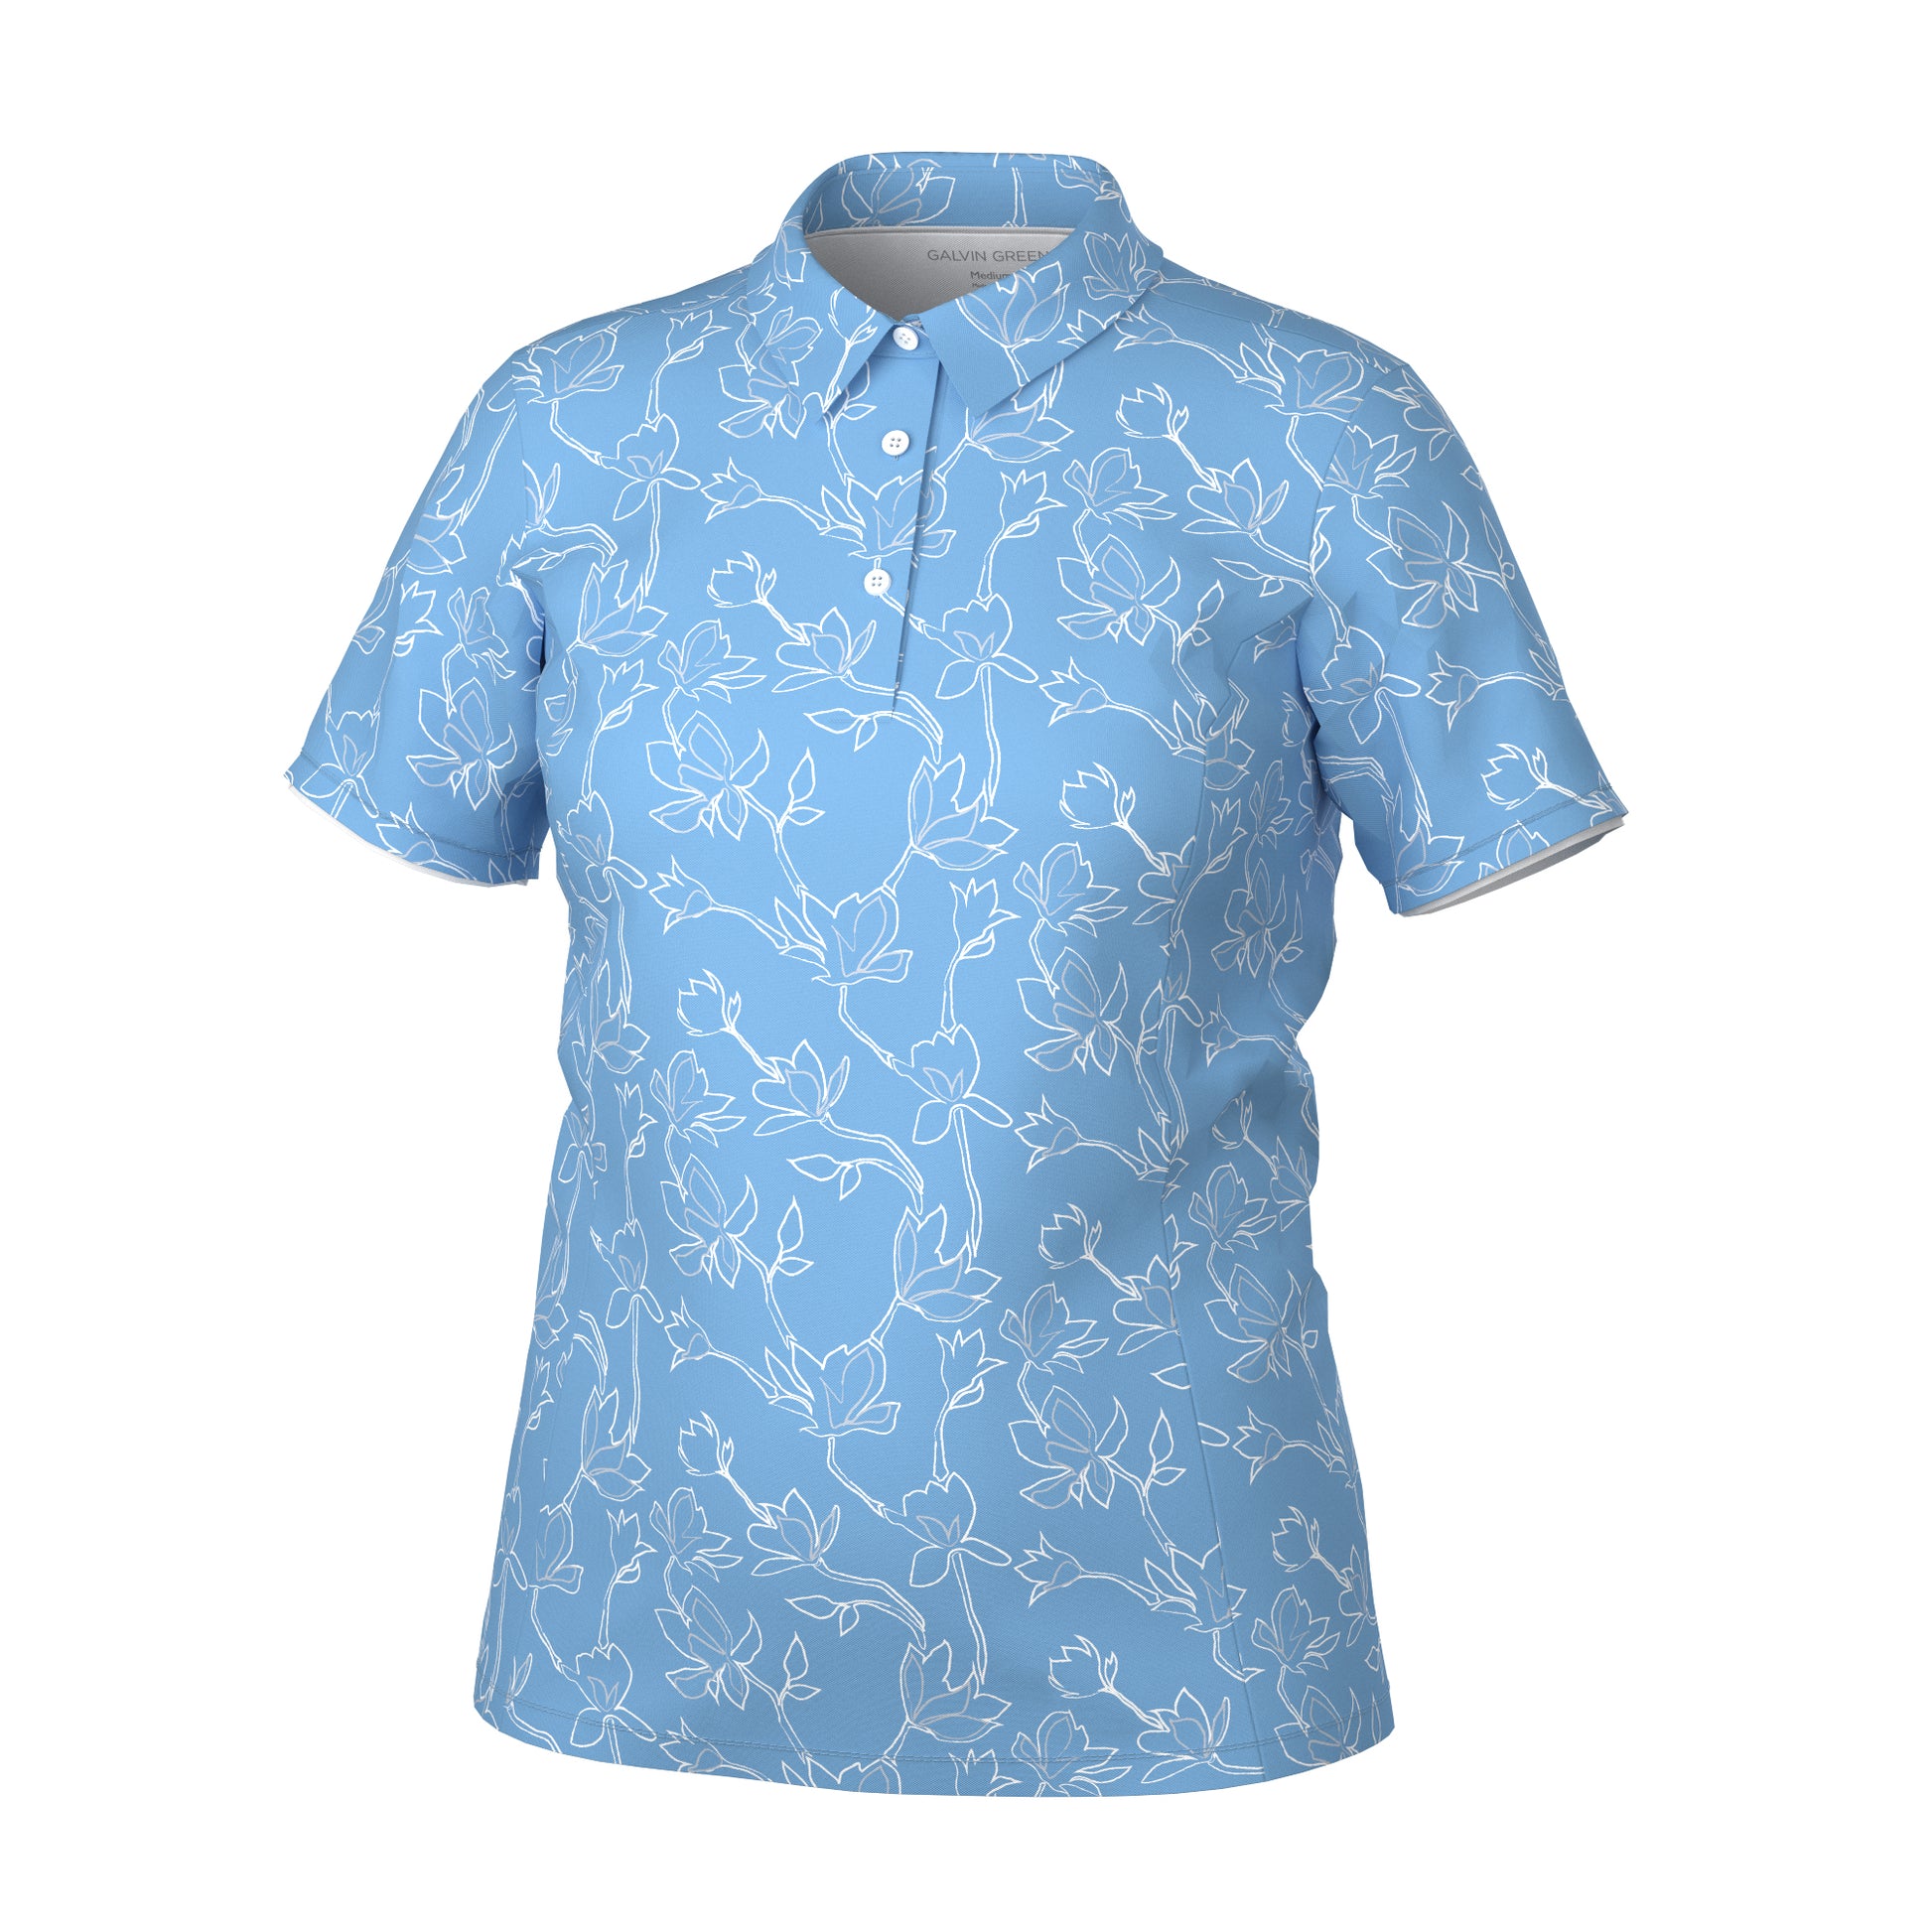 Galvin Green Ladies VENTIL8 PLUS Short Sleeve Polo with Floral Print in Alaskan Blue